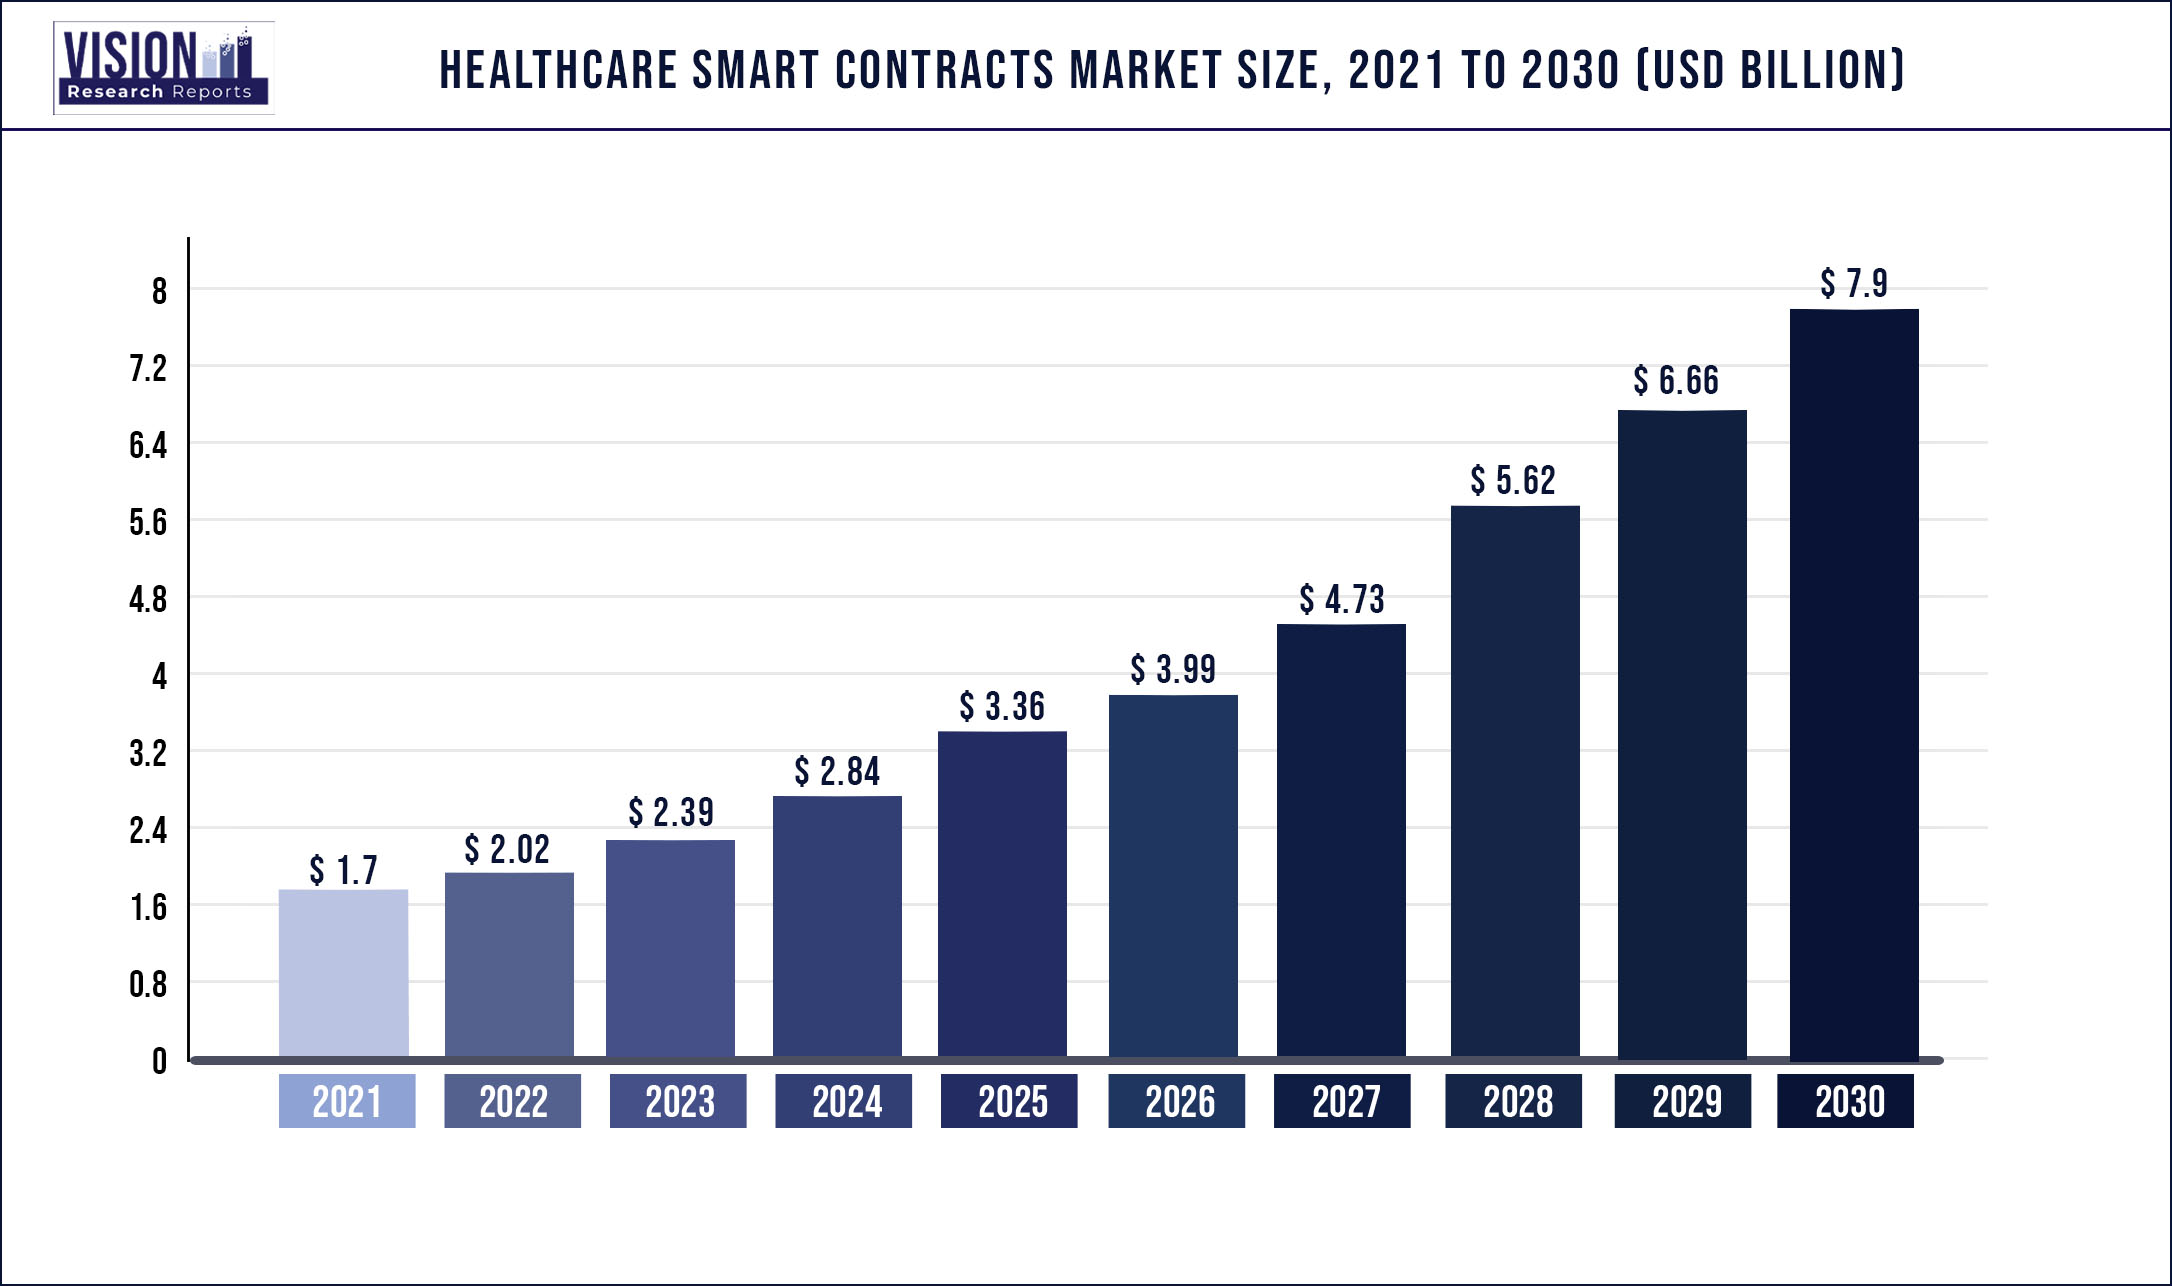 Healthcare Smart Contracts Market Size 2021 to 2030